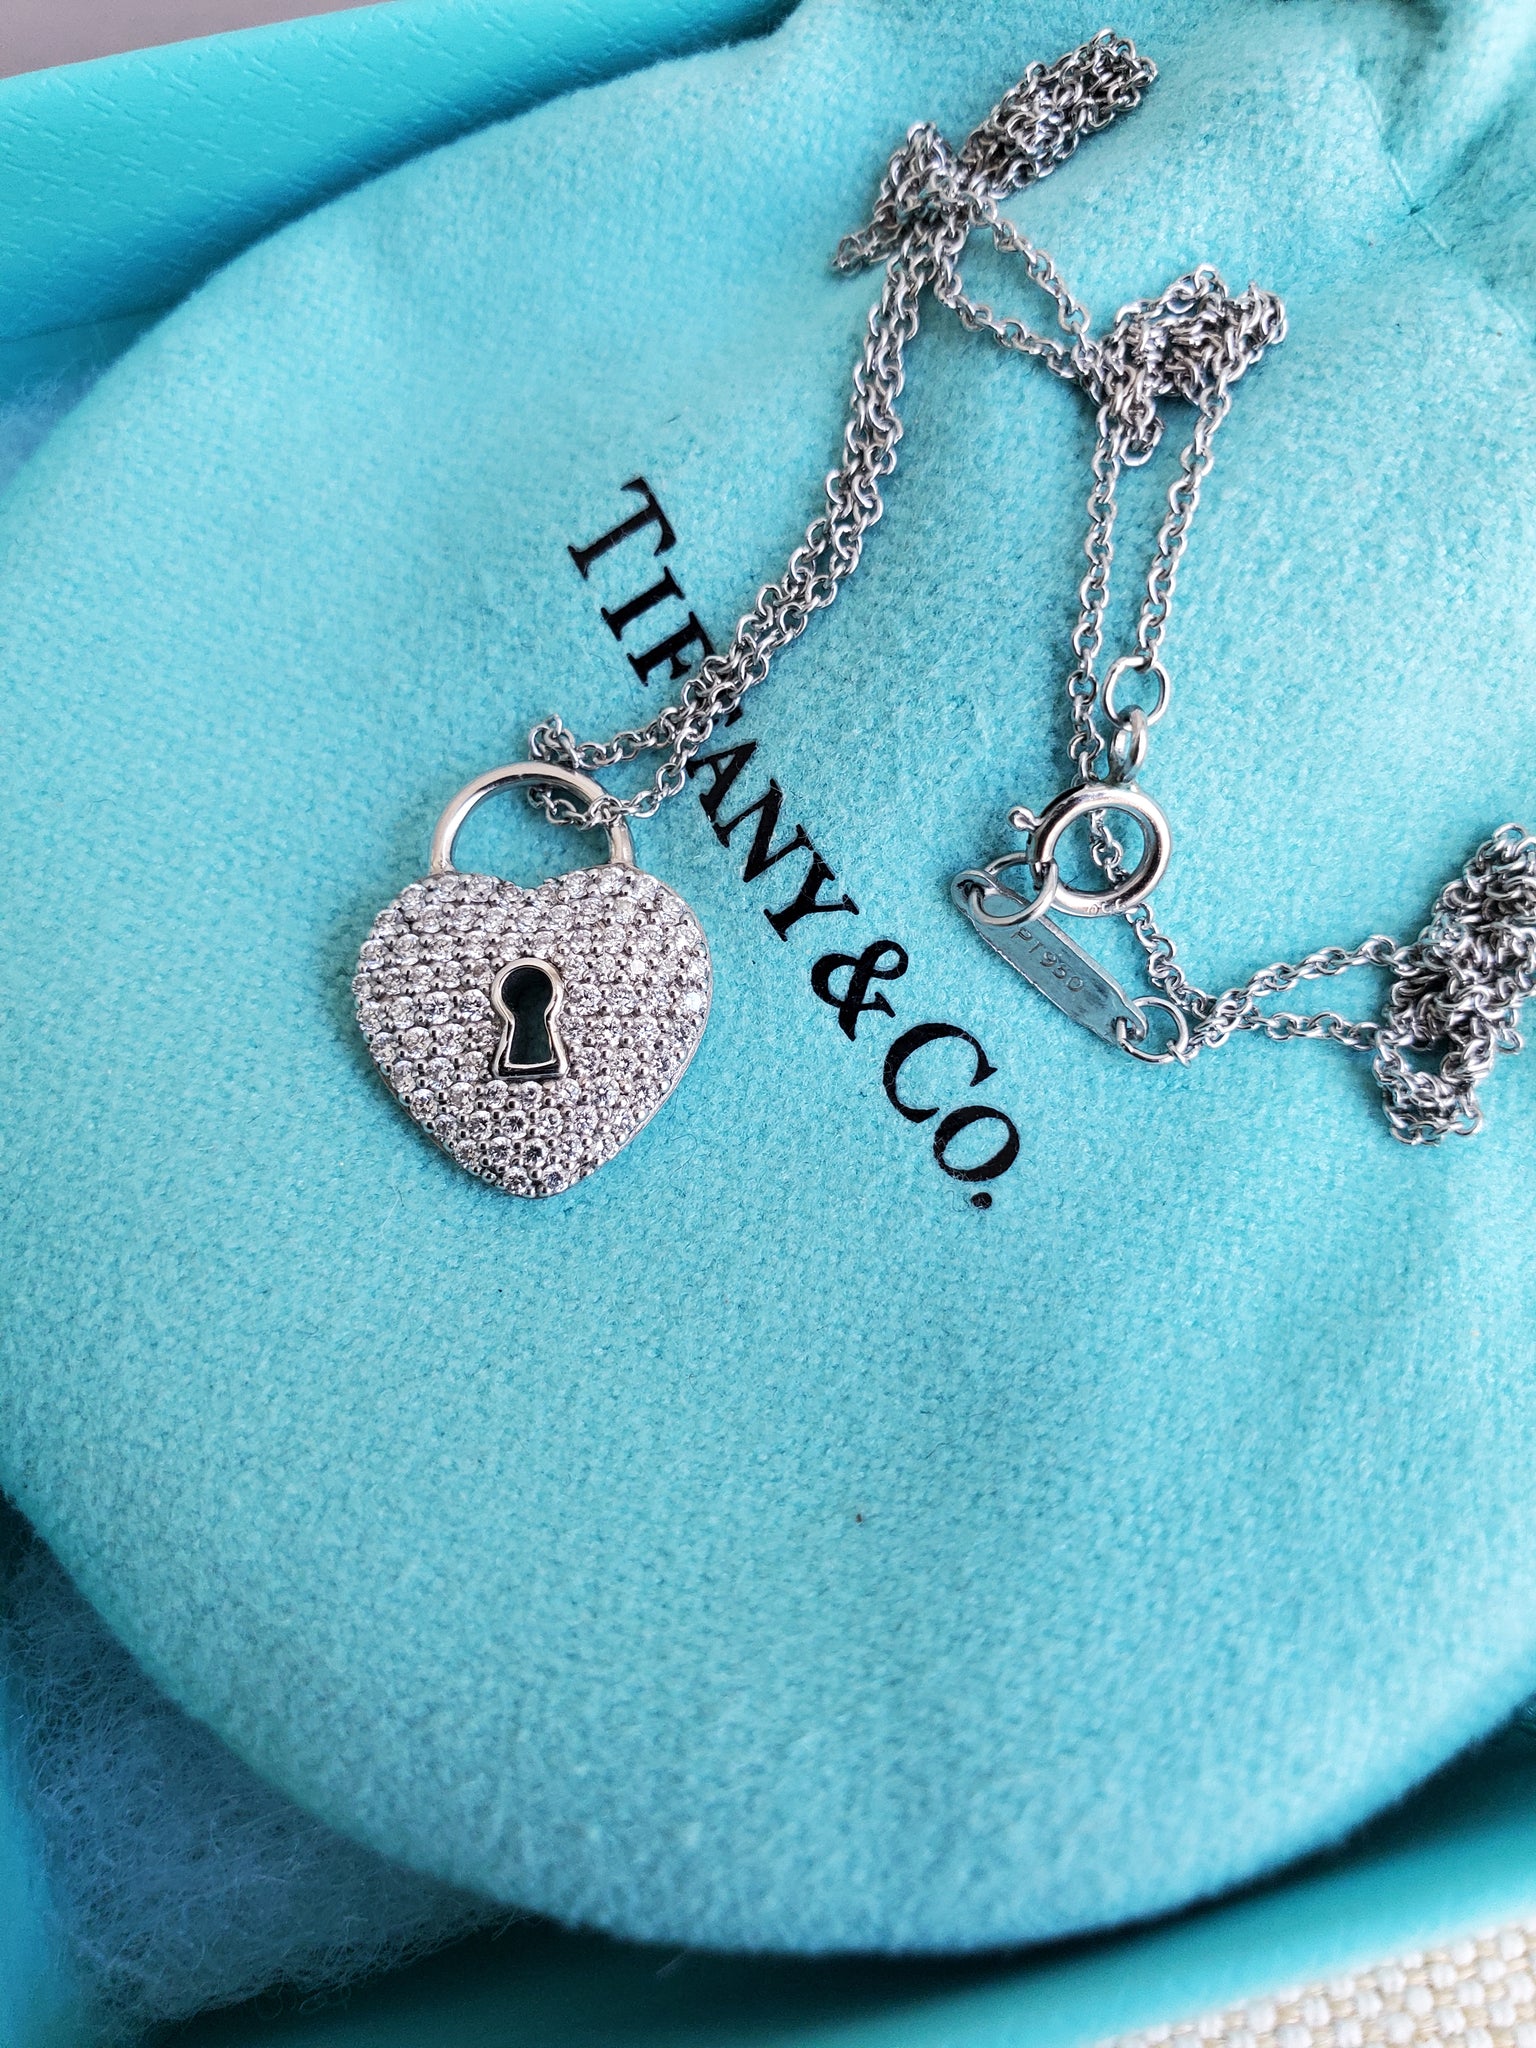 Introducing the Tiffany Lock pendant—the newest addition to our latest  collection. Available in 18k rose and white gold with round… | Instagram